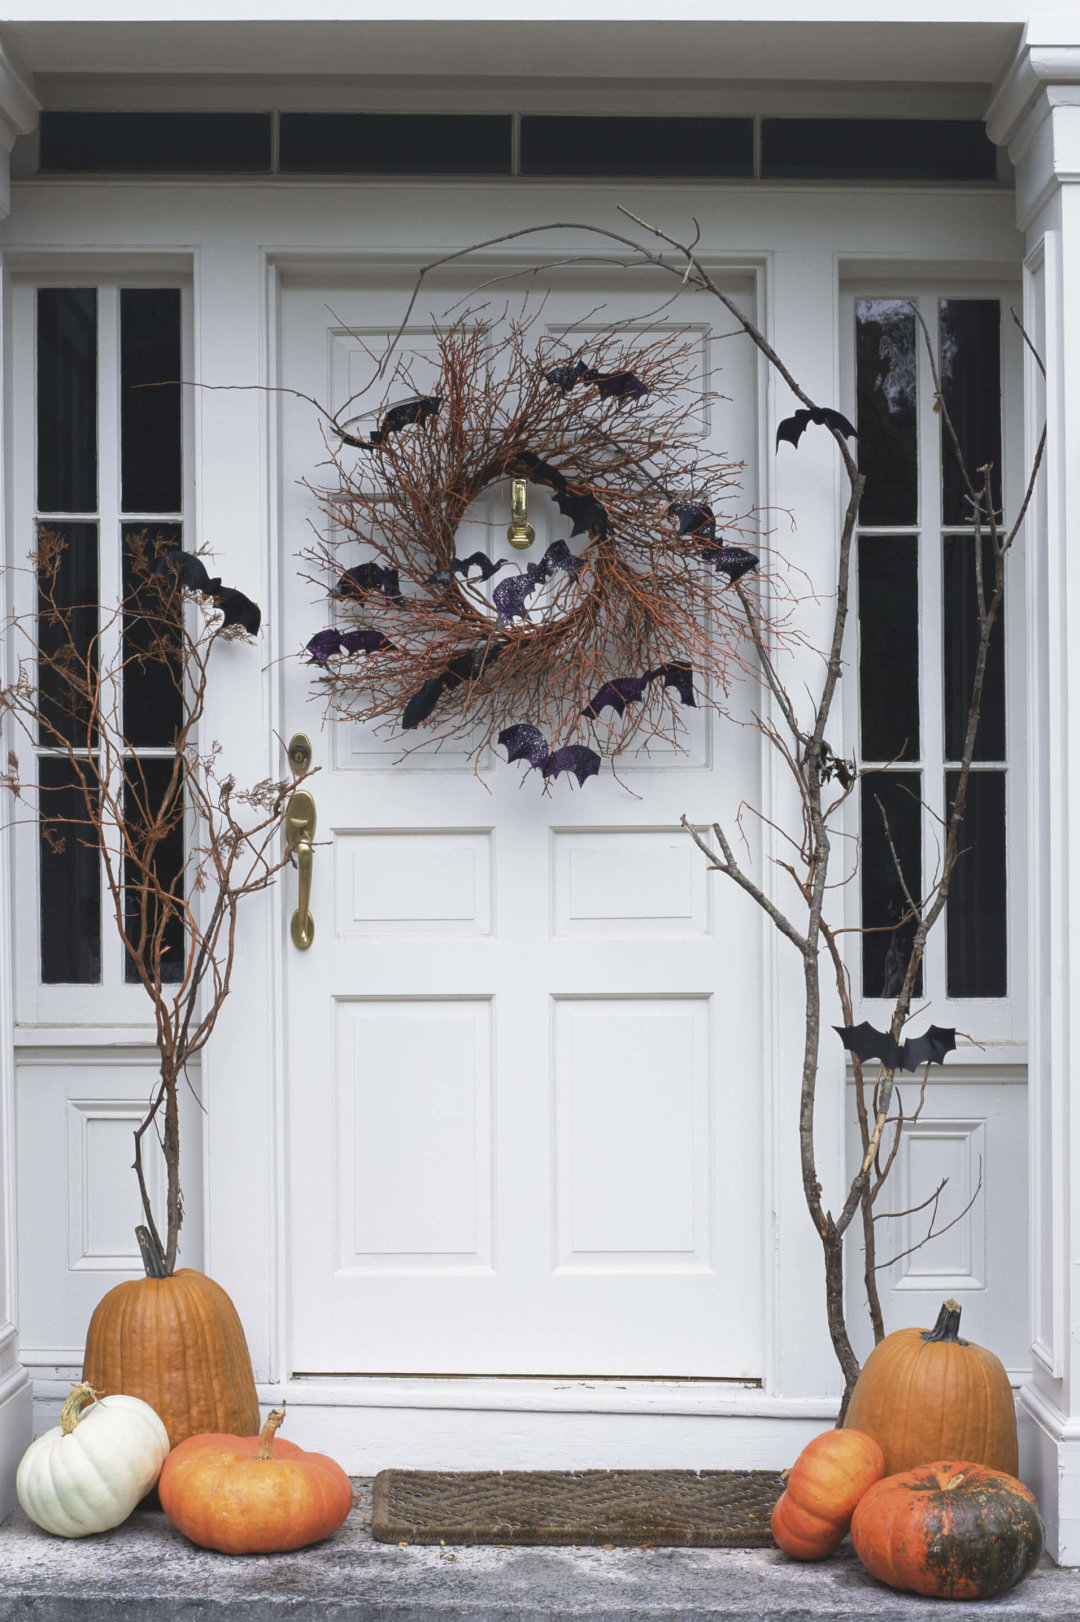 chic fall decor ideas - decorate your door 